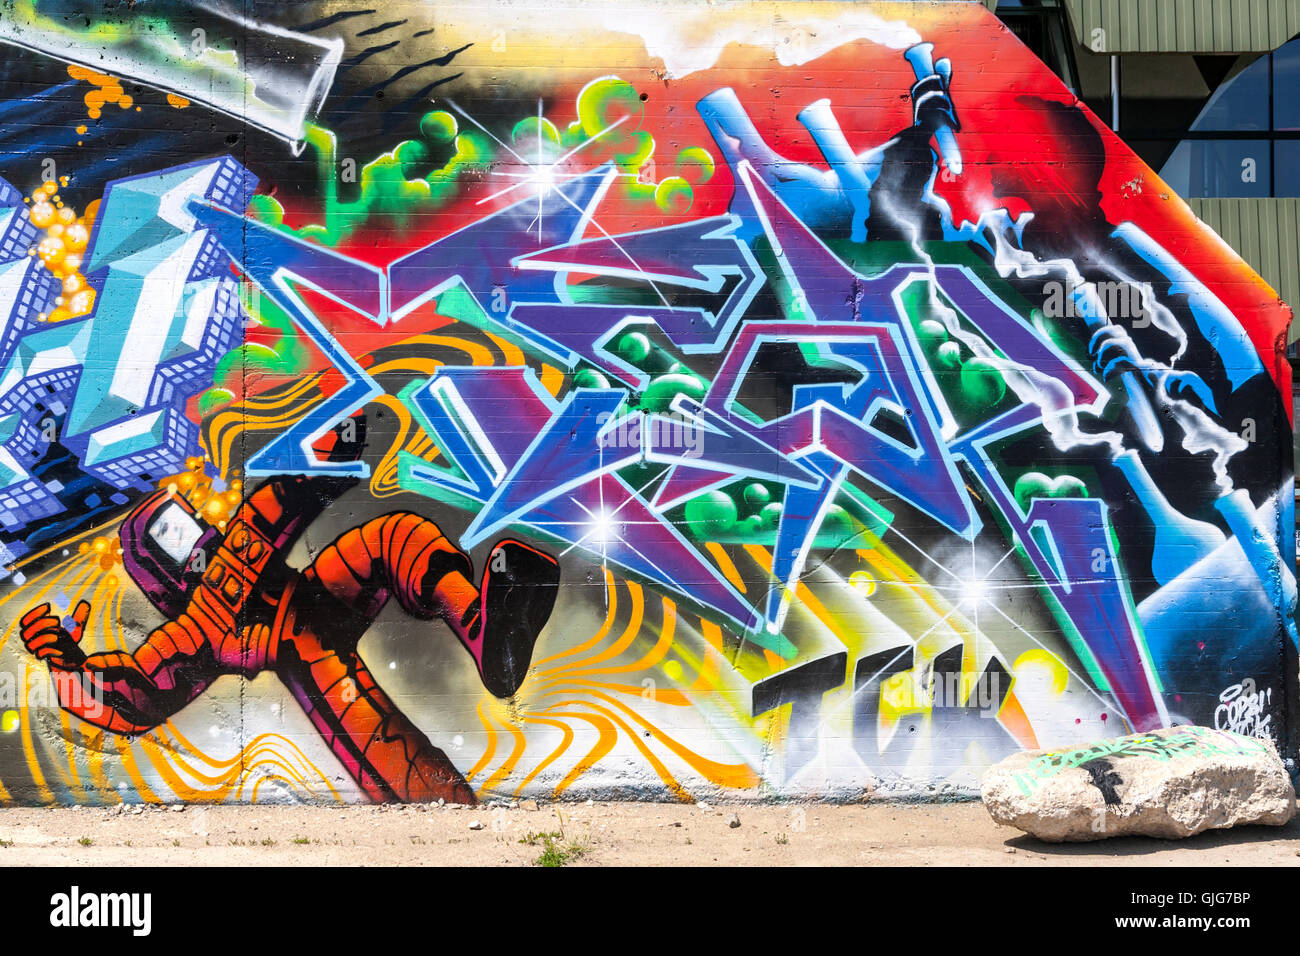 Graffiti of test tubes and a man in a protective suit, Berlin, Germany. Stock Photo